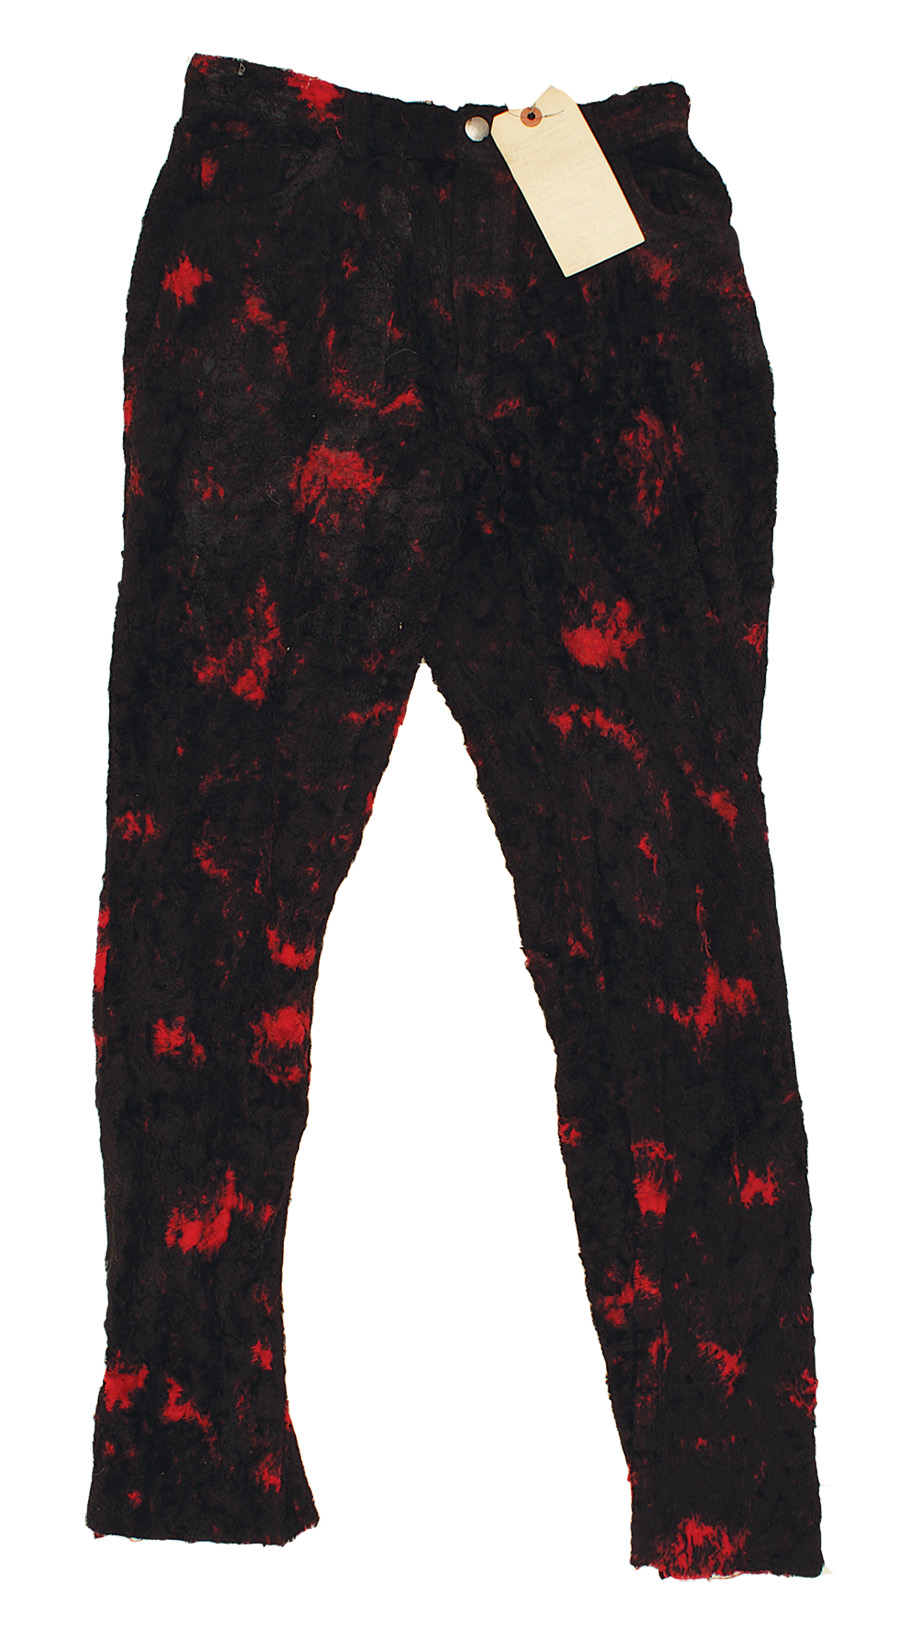 Lot Detail - Liza Minnelli Owned and Worn Black & Red Pants